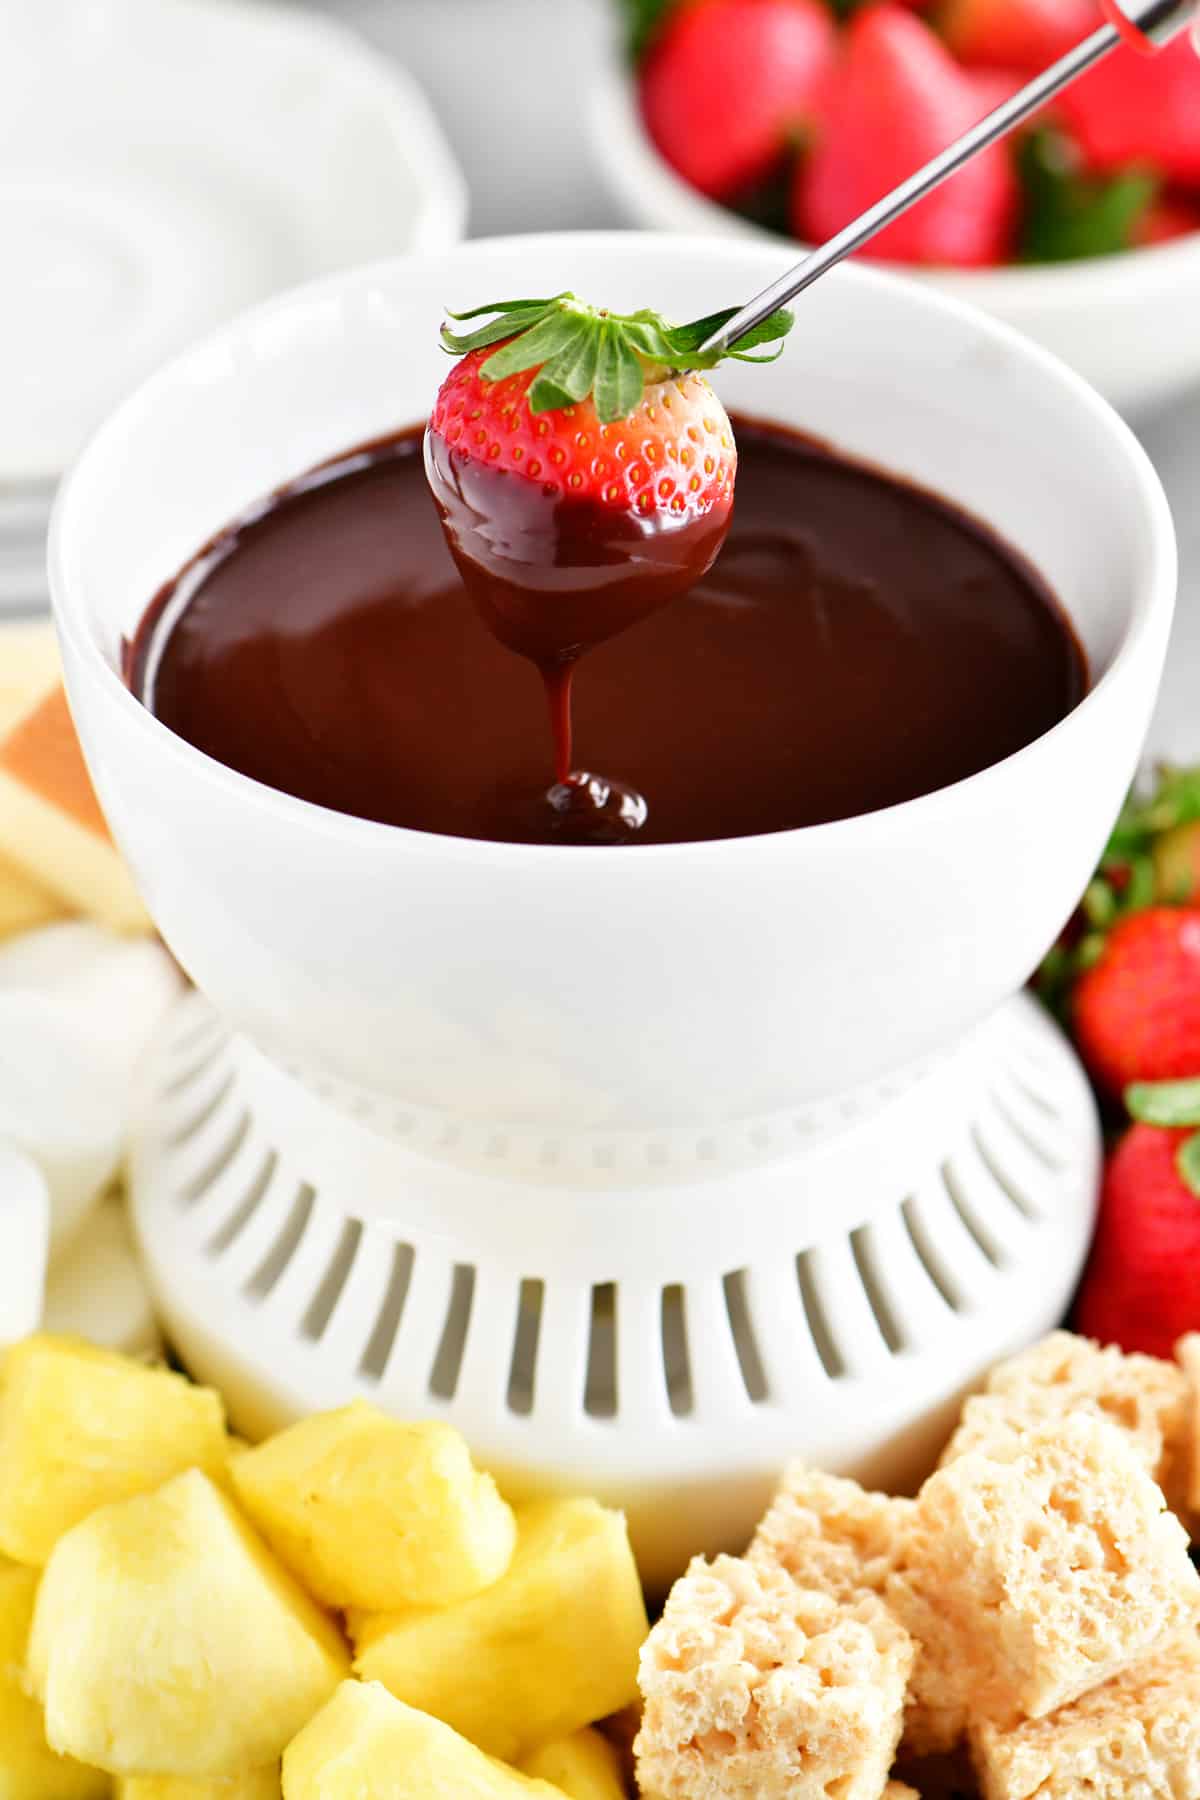 A strawberry being dipped into the chocolate fondue.